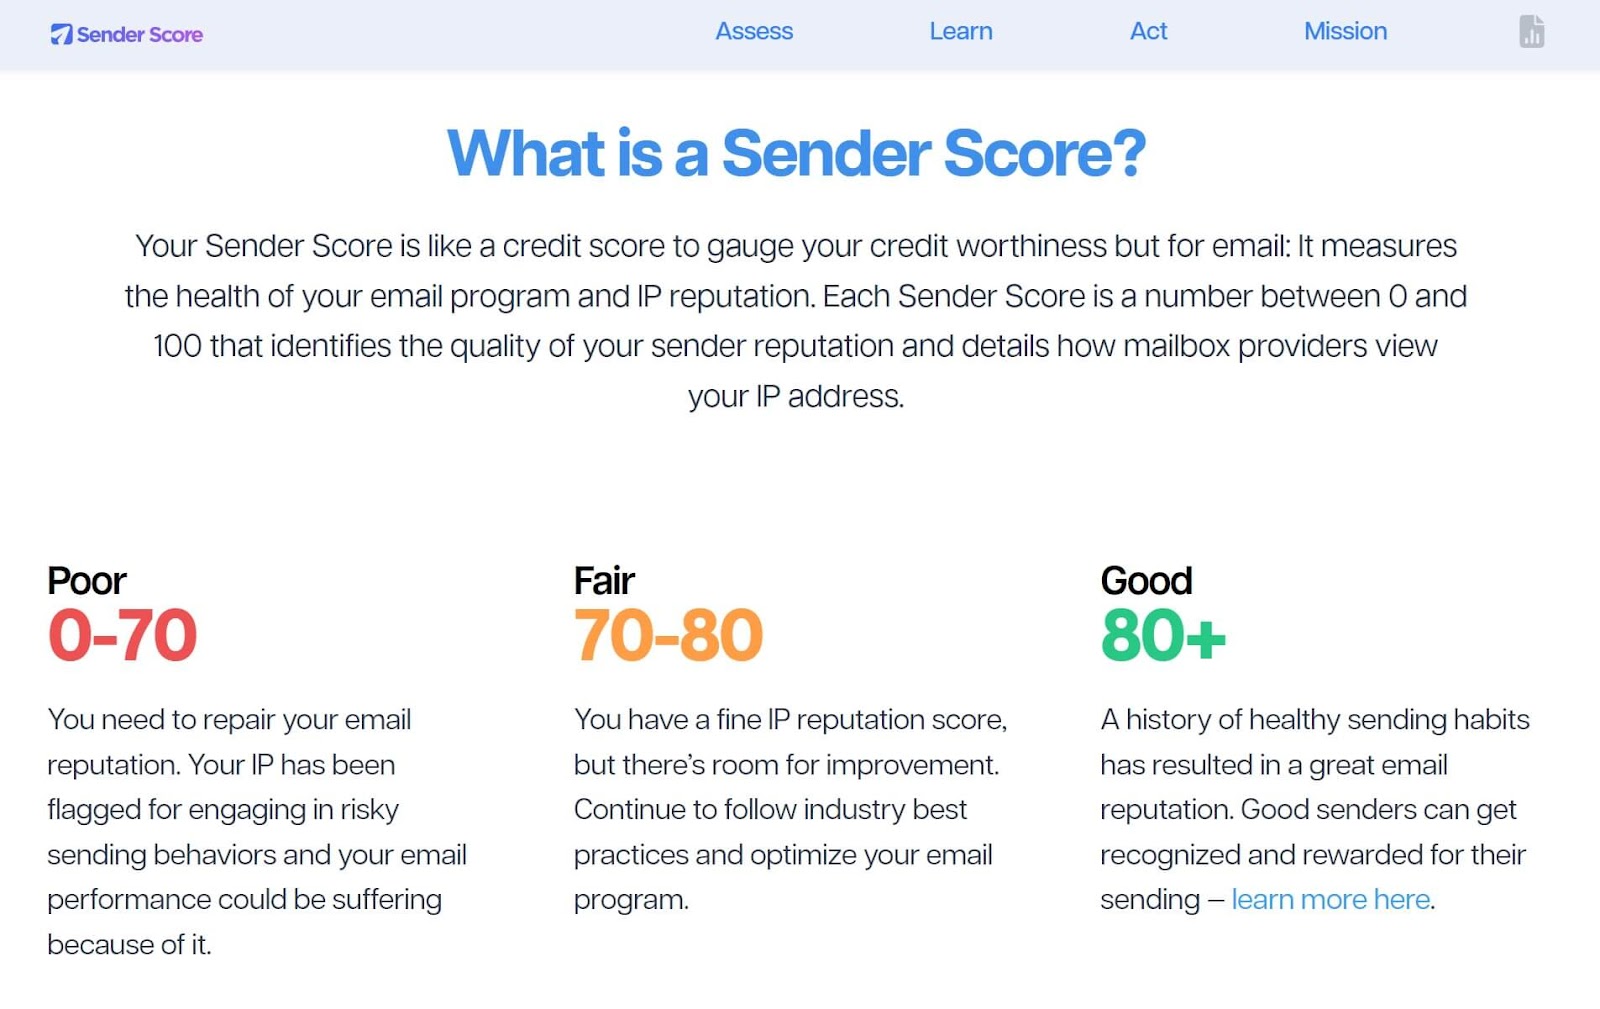 Screenshot of Sender Score website shows white background and colorful text to indicate what is a poor, fair or good sender score. 80+ is good.